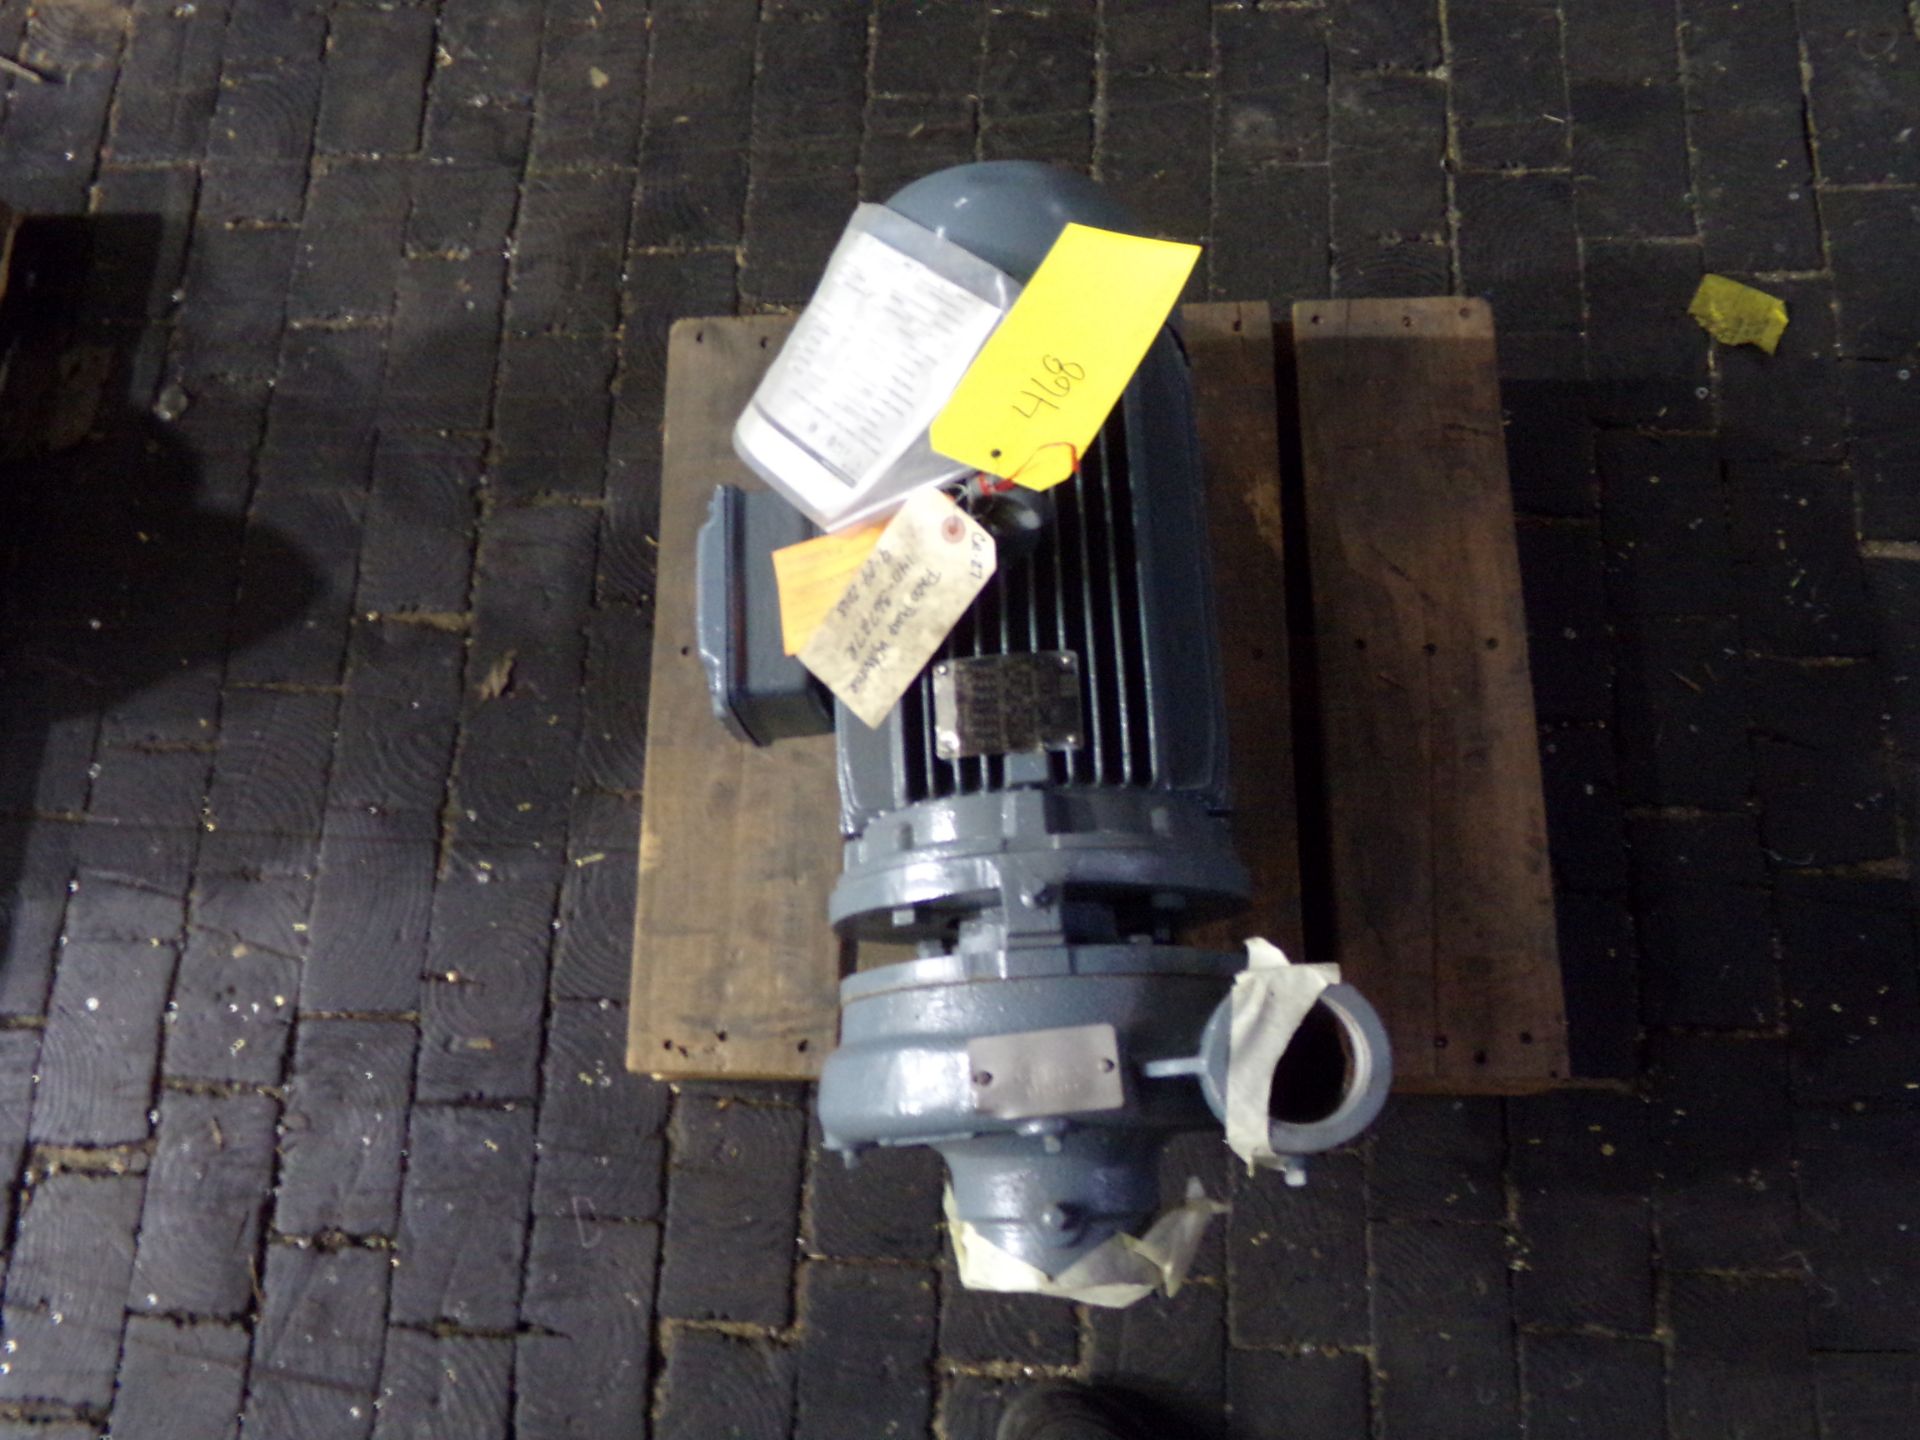 WEG ELECTRIC MOTOR 10HP 60 HZ 3475 RPM W213/5JM FRAME WITH PACO PUMP ATTACHED - Image 4 of 9